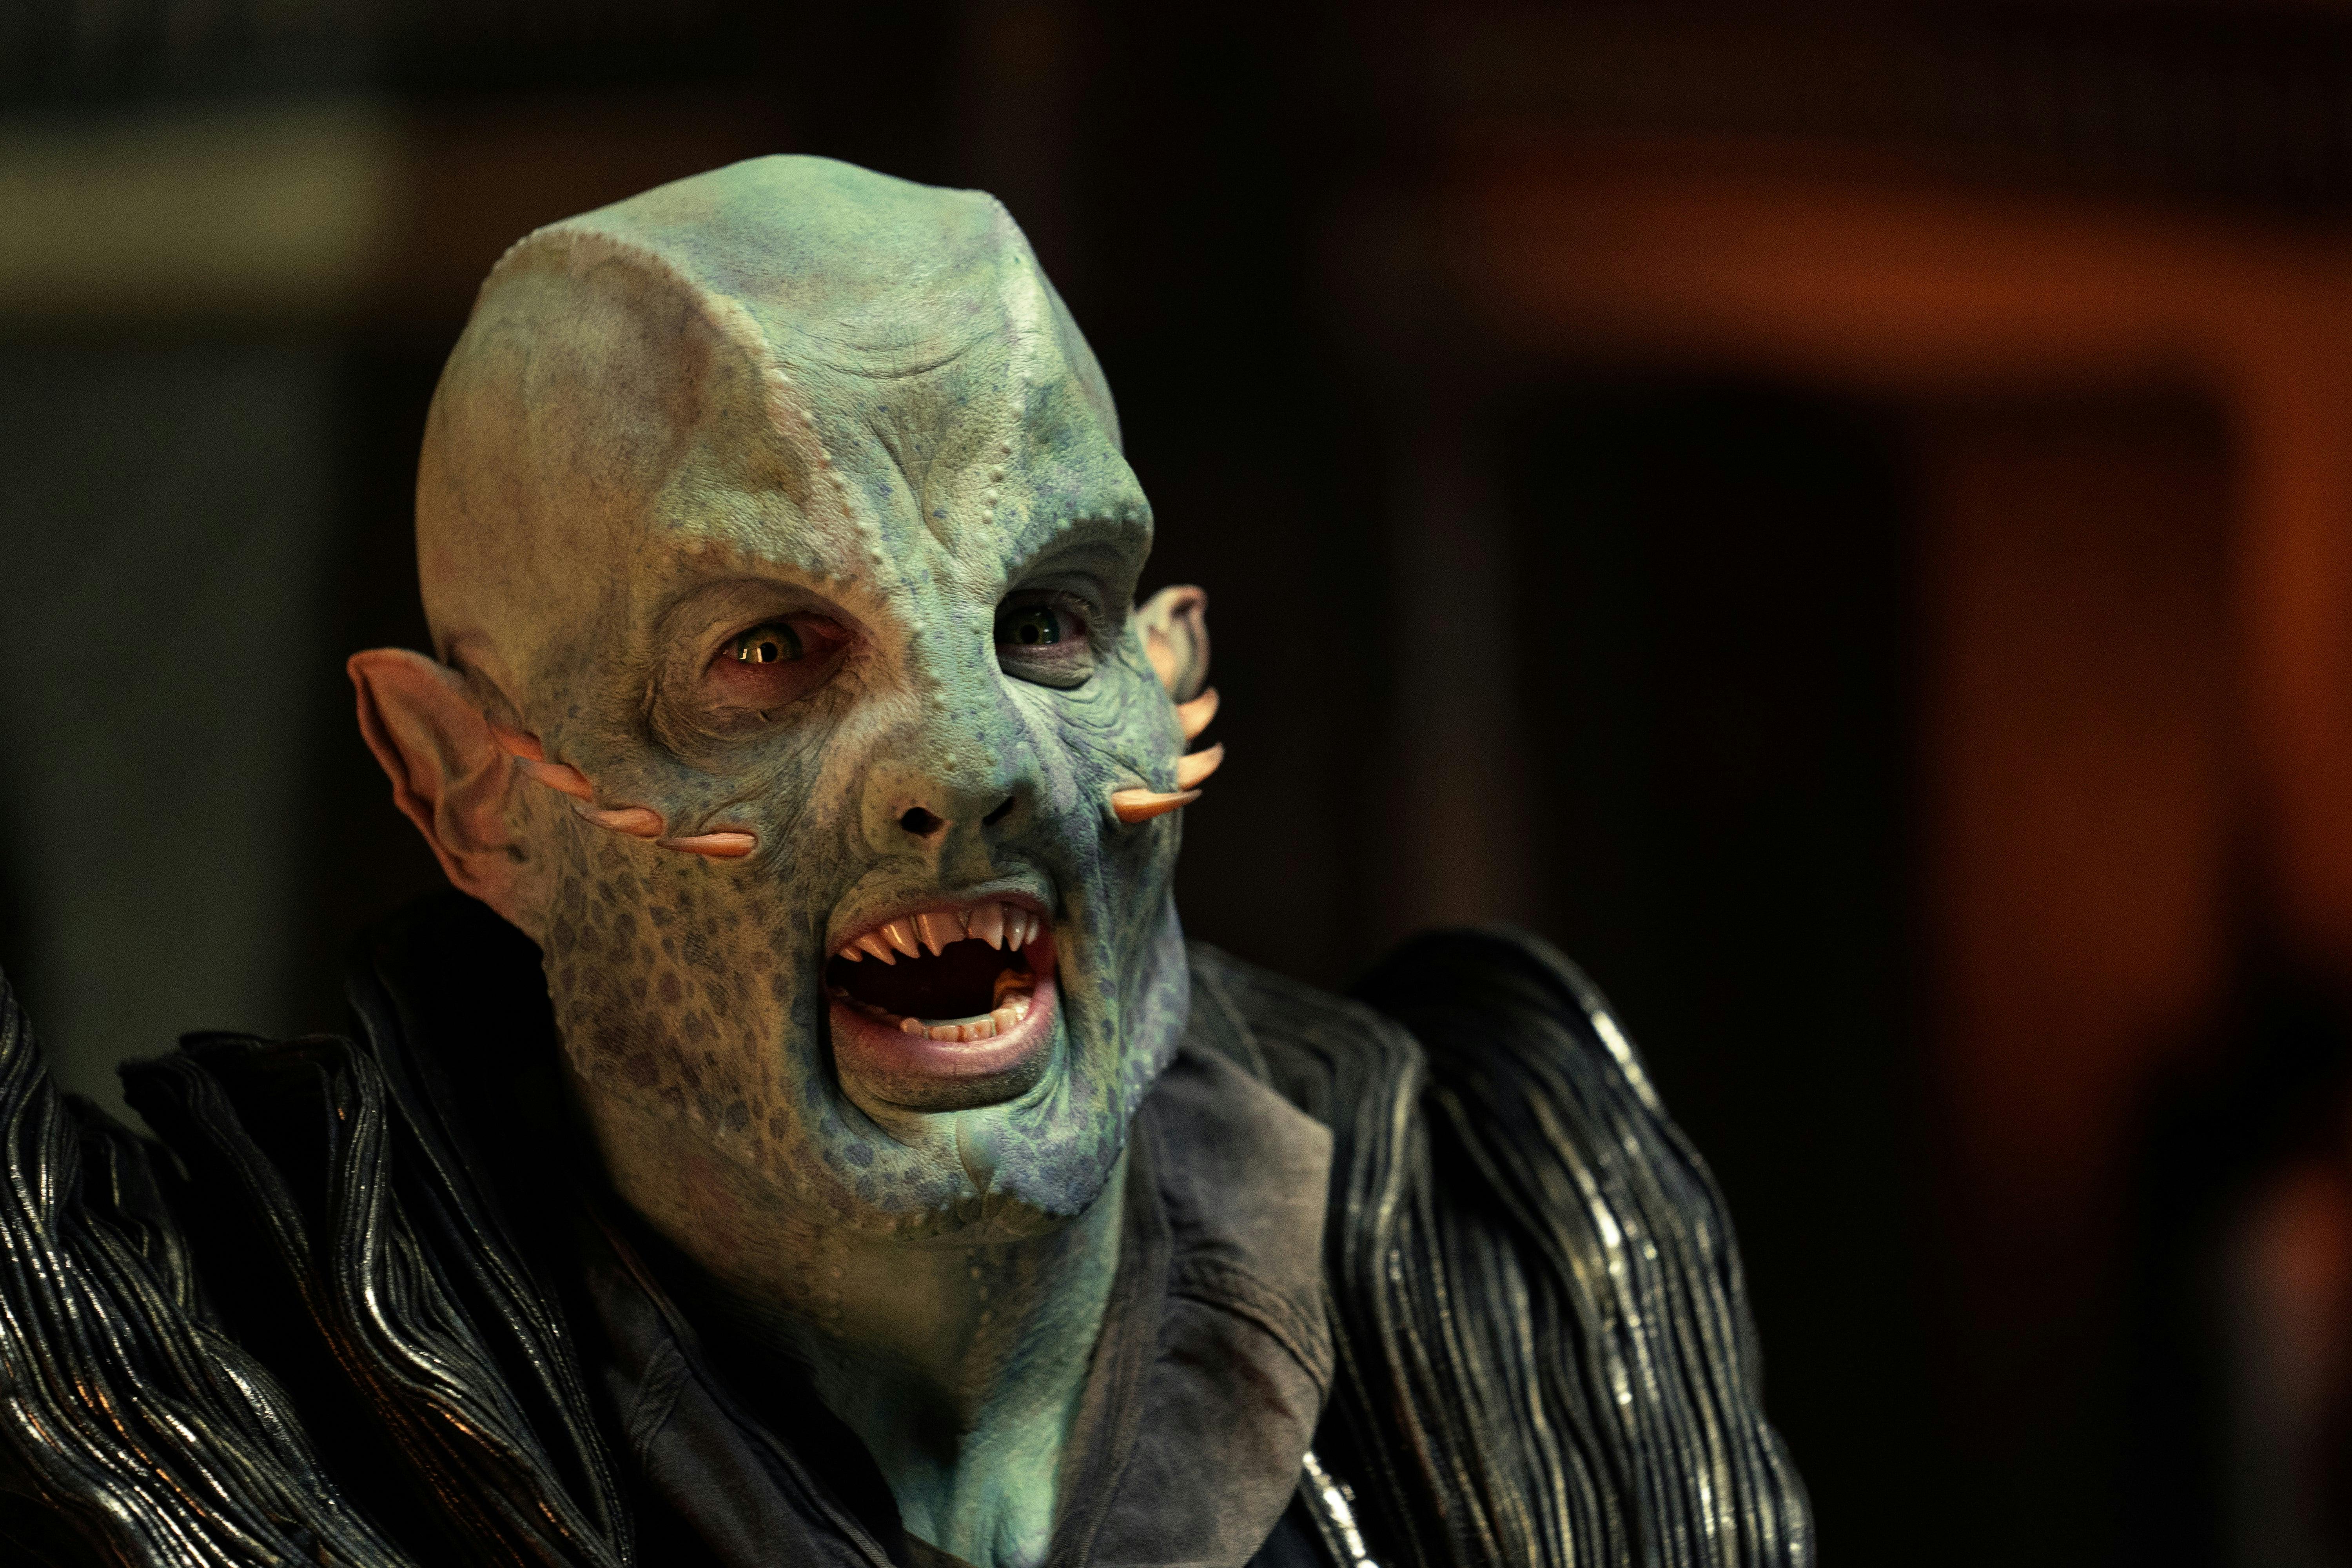 A blue-green alien with spikes on his face snarls at someone off camera.